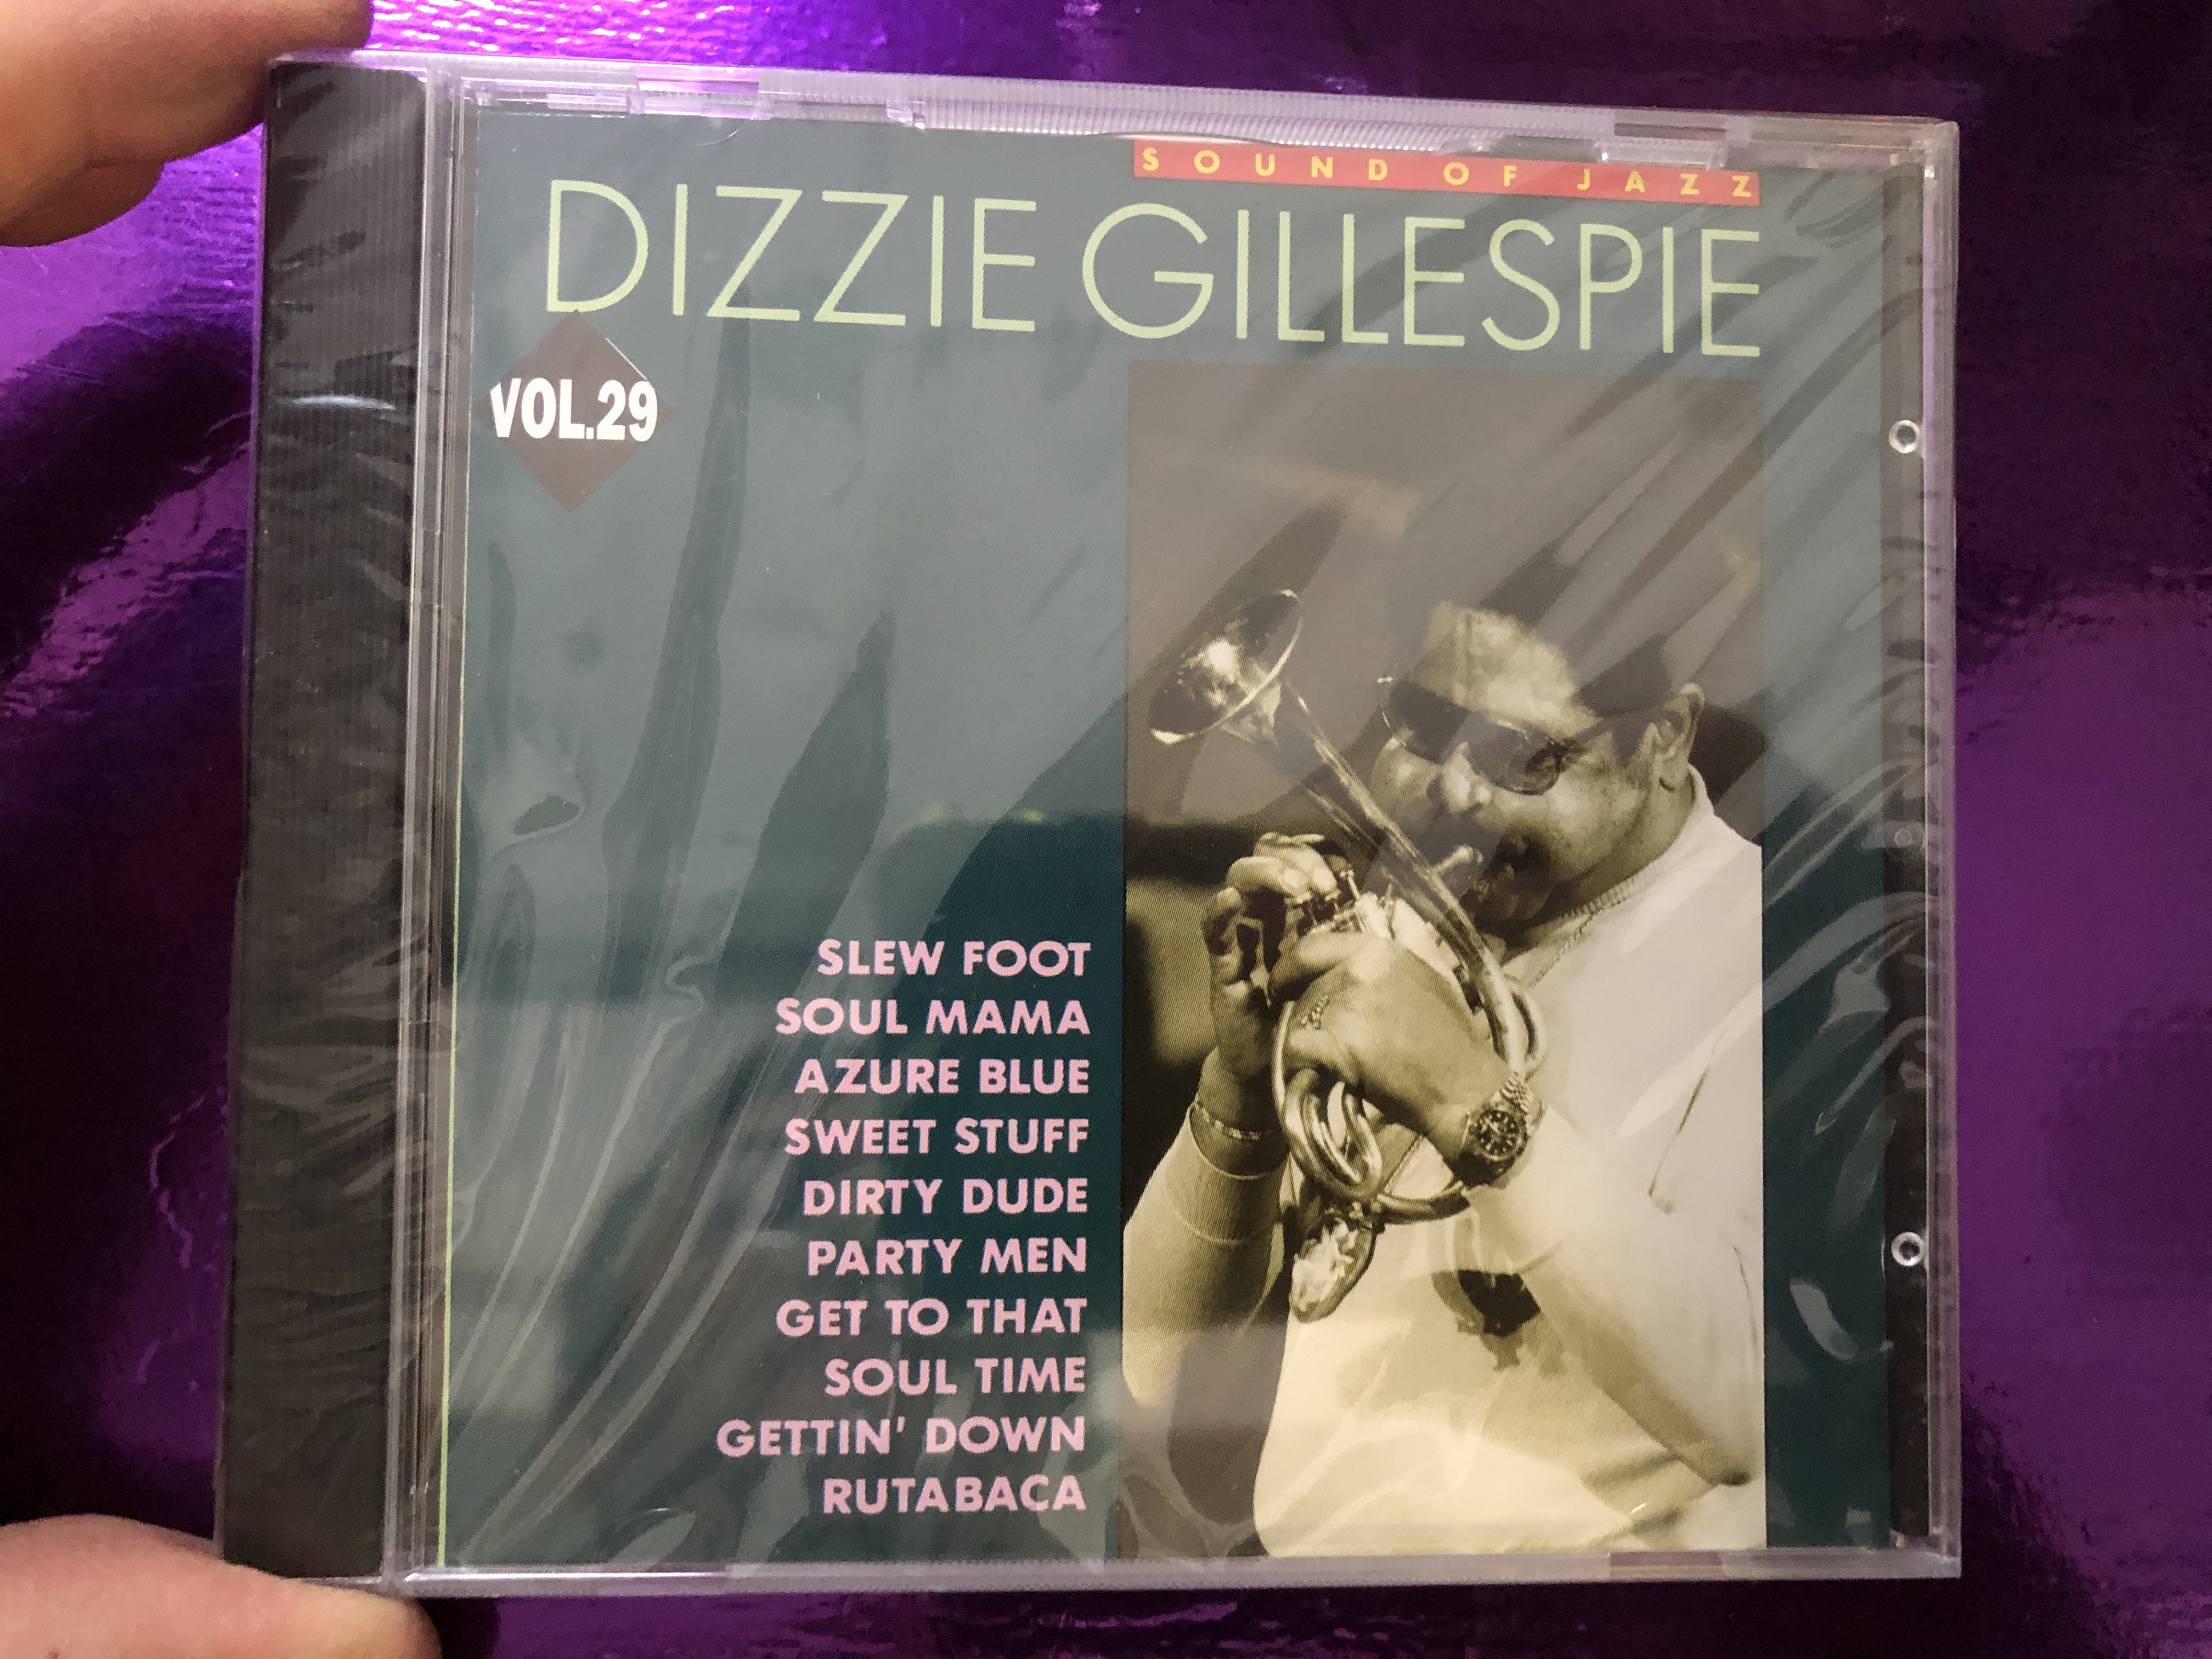 sound-of-jazz-dizzie-gillespie-vol.-29-slew-foot-soul-mama-azure-blue-sweet-stuff-dirty-dude-party-men-get-to-that-soul-time-gettin-down-rutabaca-galaxy-music-audio-cd-1994-3886-1-.jpg